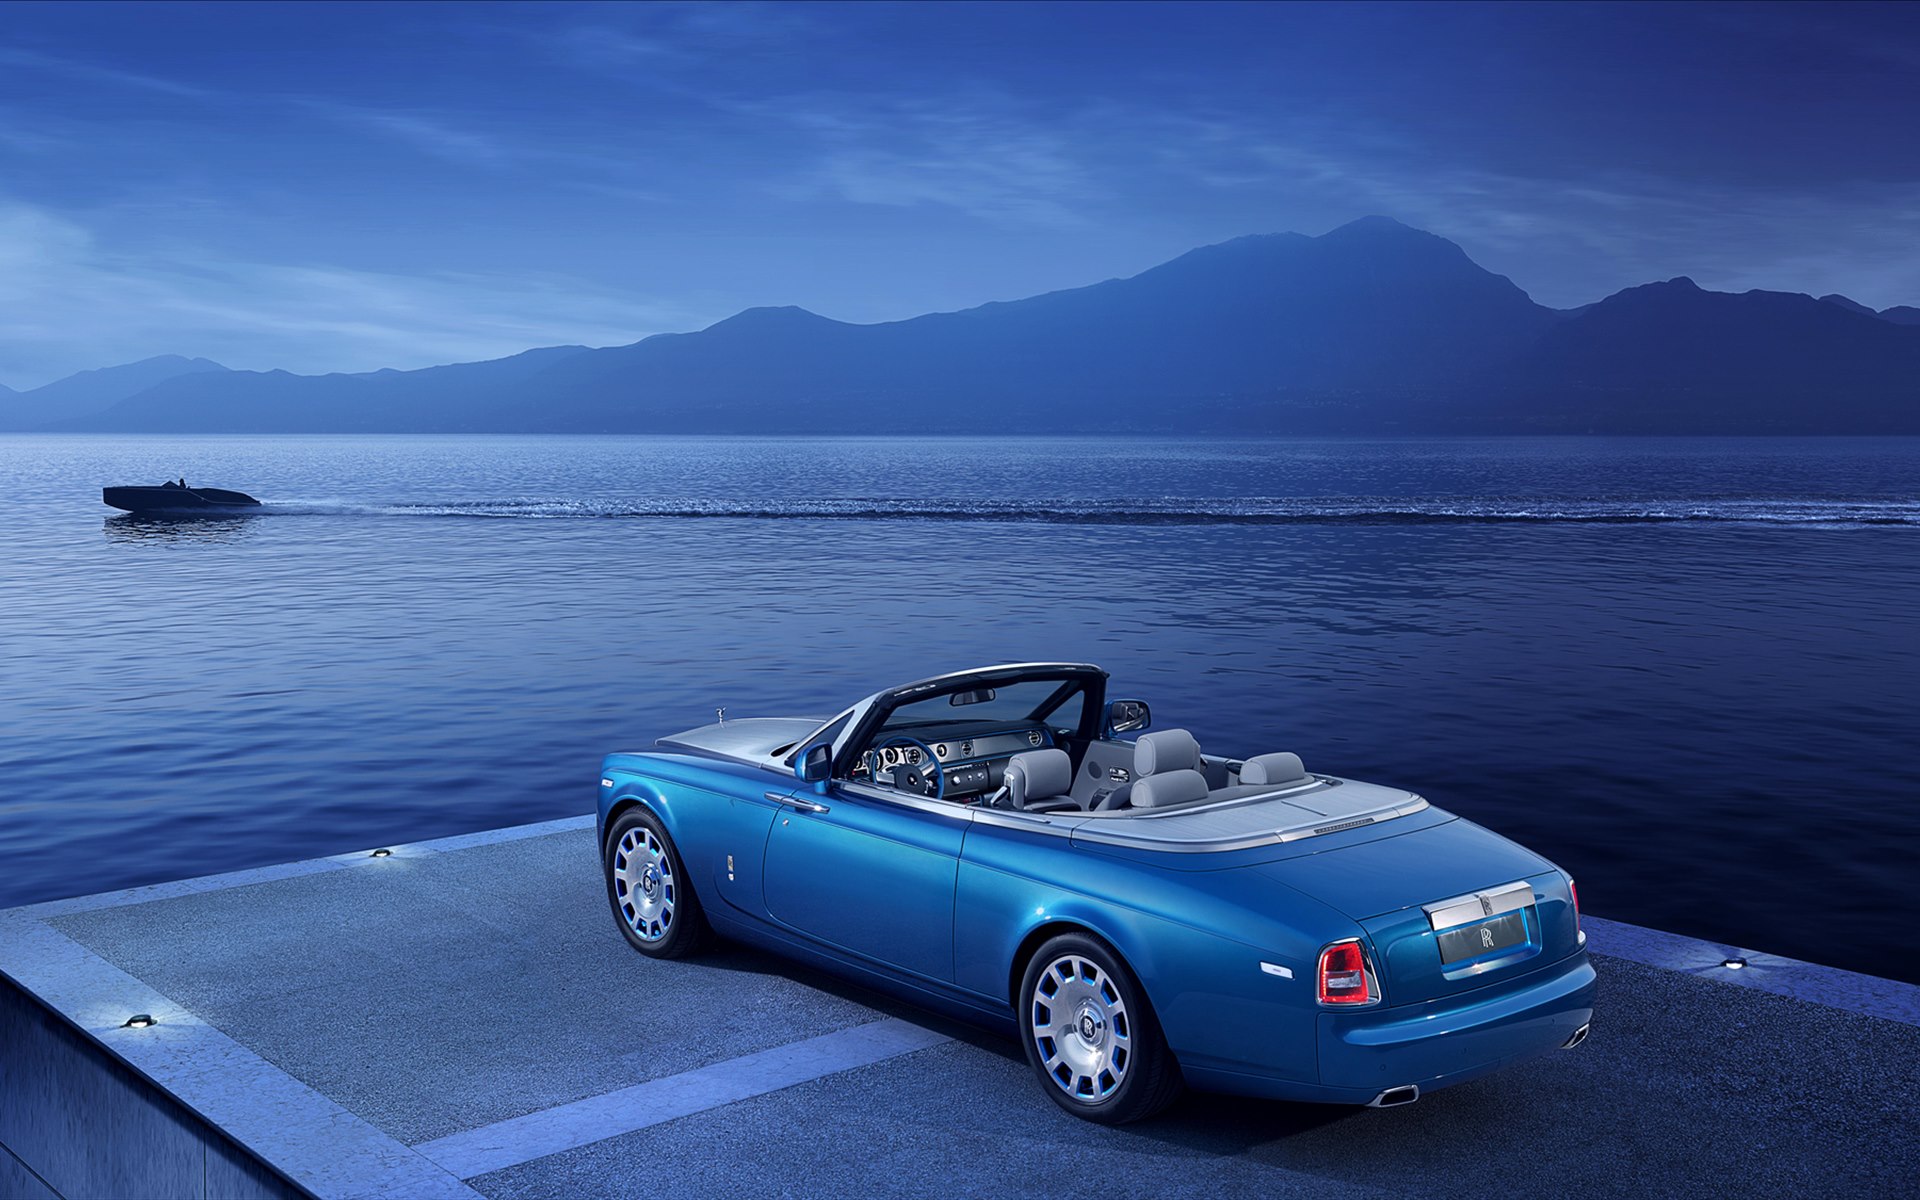 Rolls Royce Phantom Drophead Coupe Waterspeed Collection 2014(˹˹Ӱ)(ֽ3)